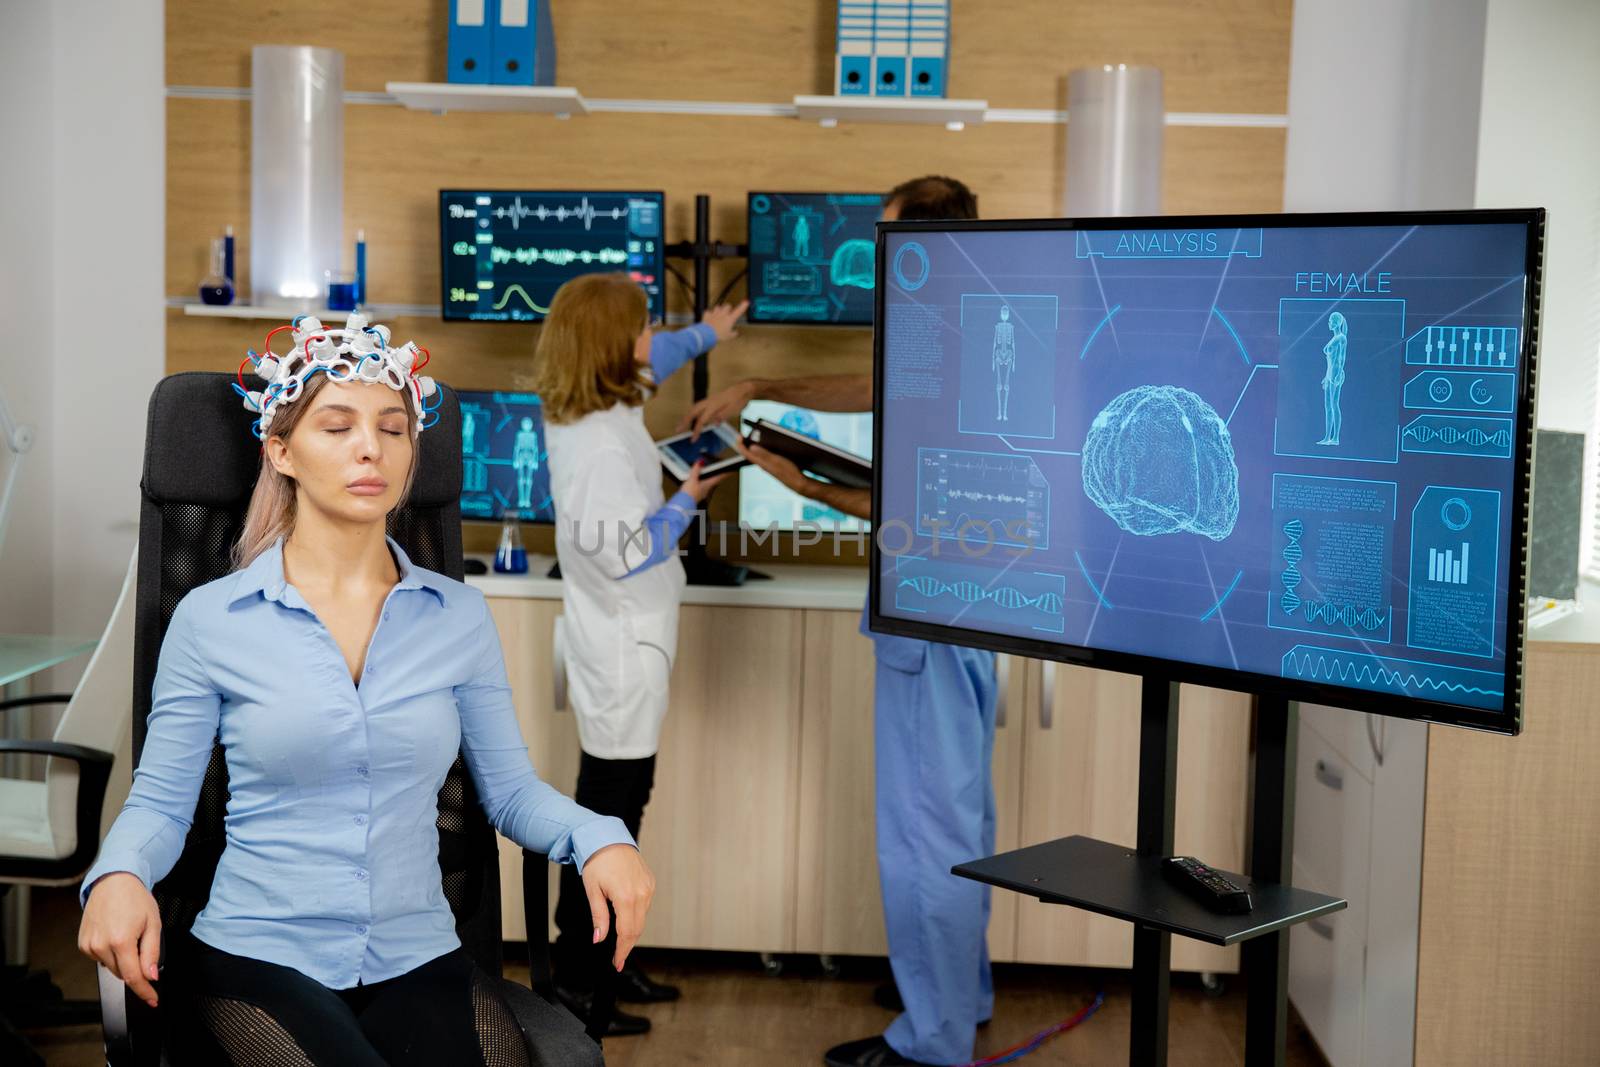 Patient who is brain scanned and his activity is seen on the big screen. Neurology headset